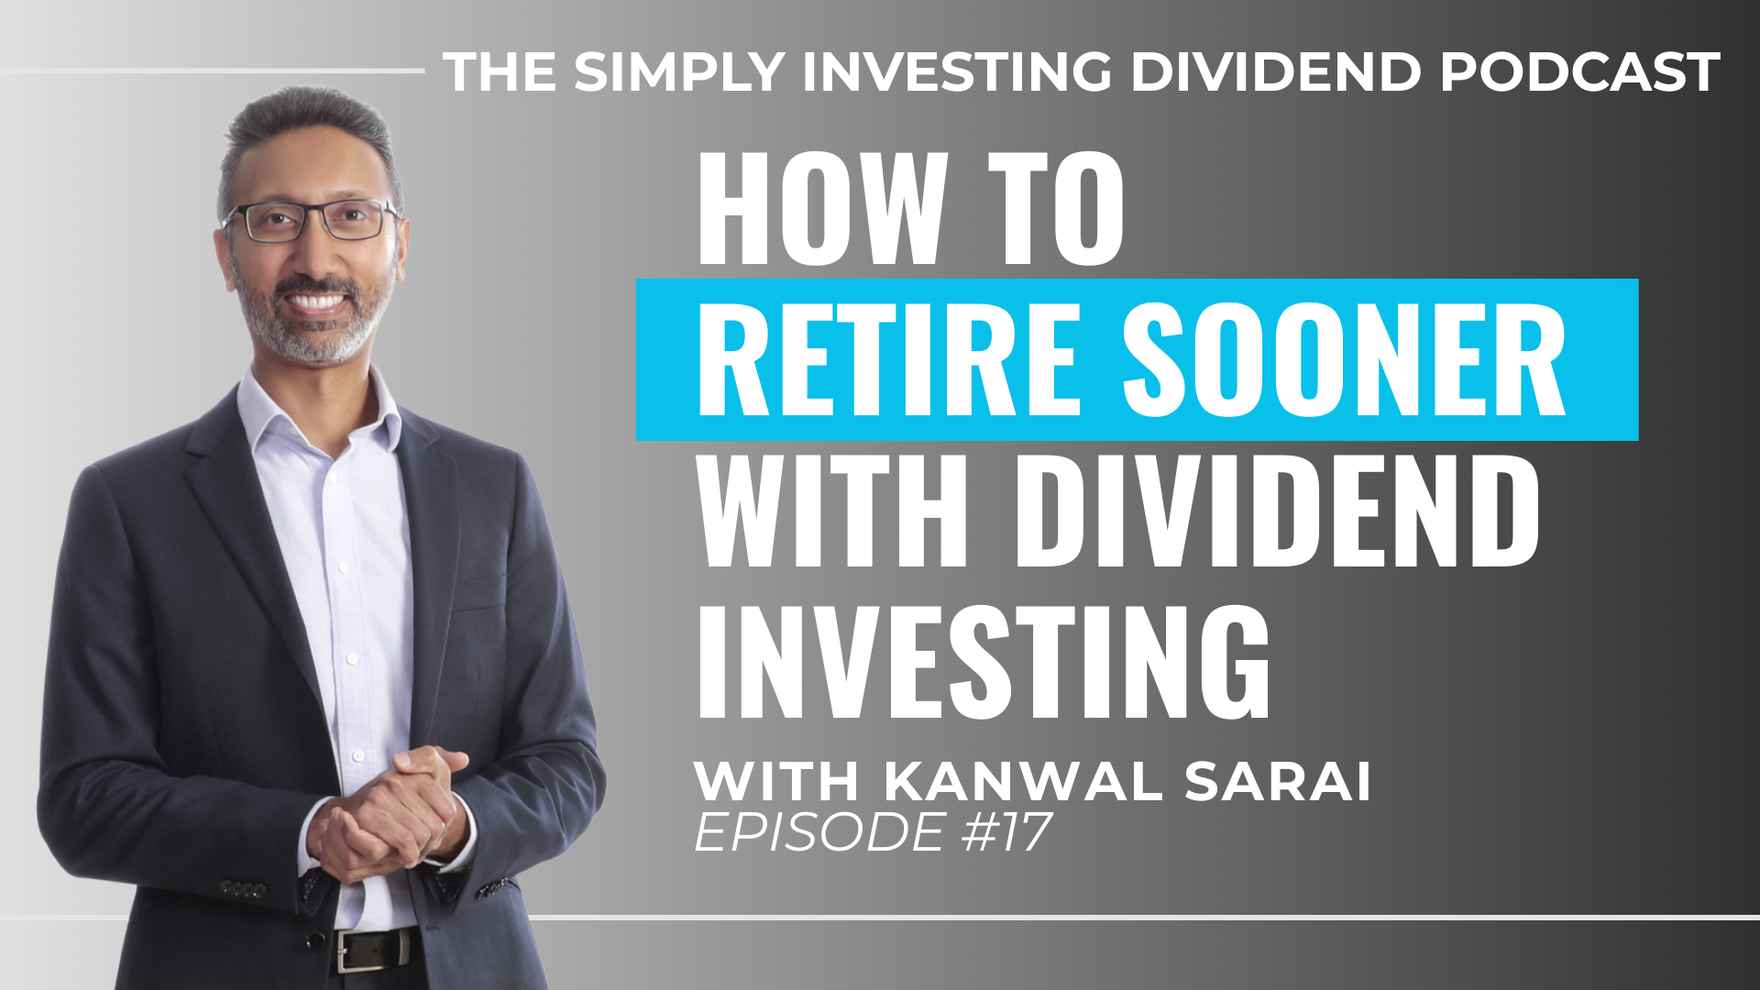 Simply Investing Dividend Podcast Episode 17 - How to Retire Sooner with Dividend Investing